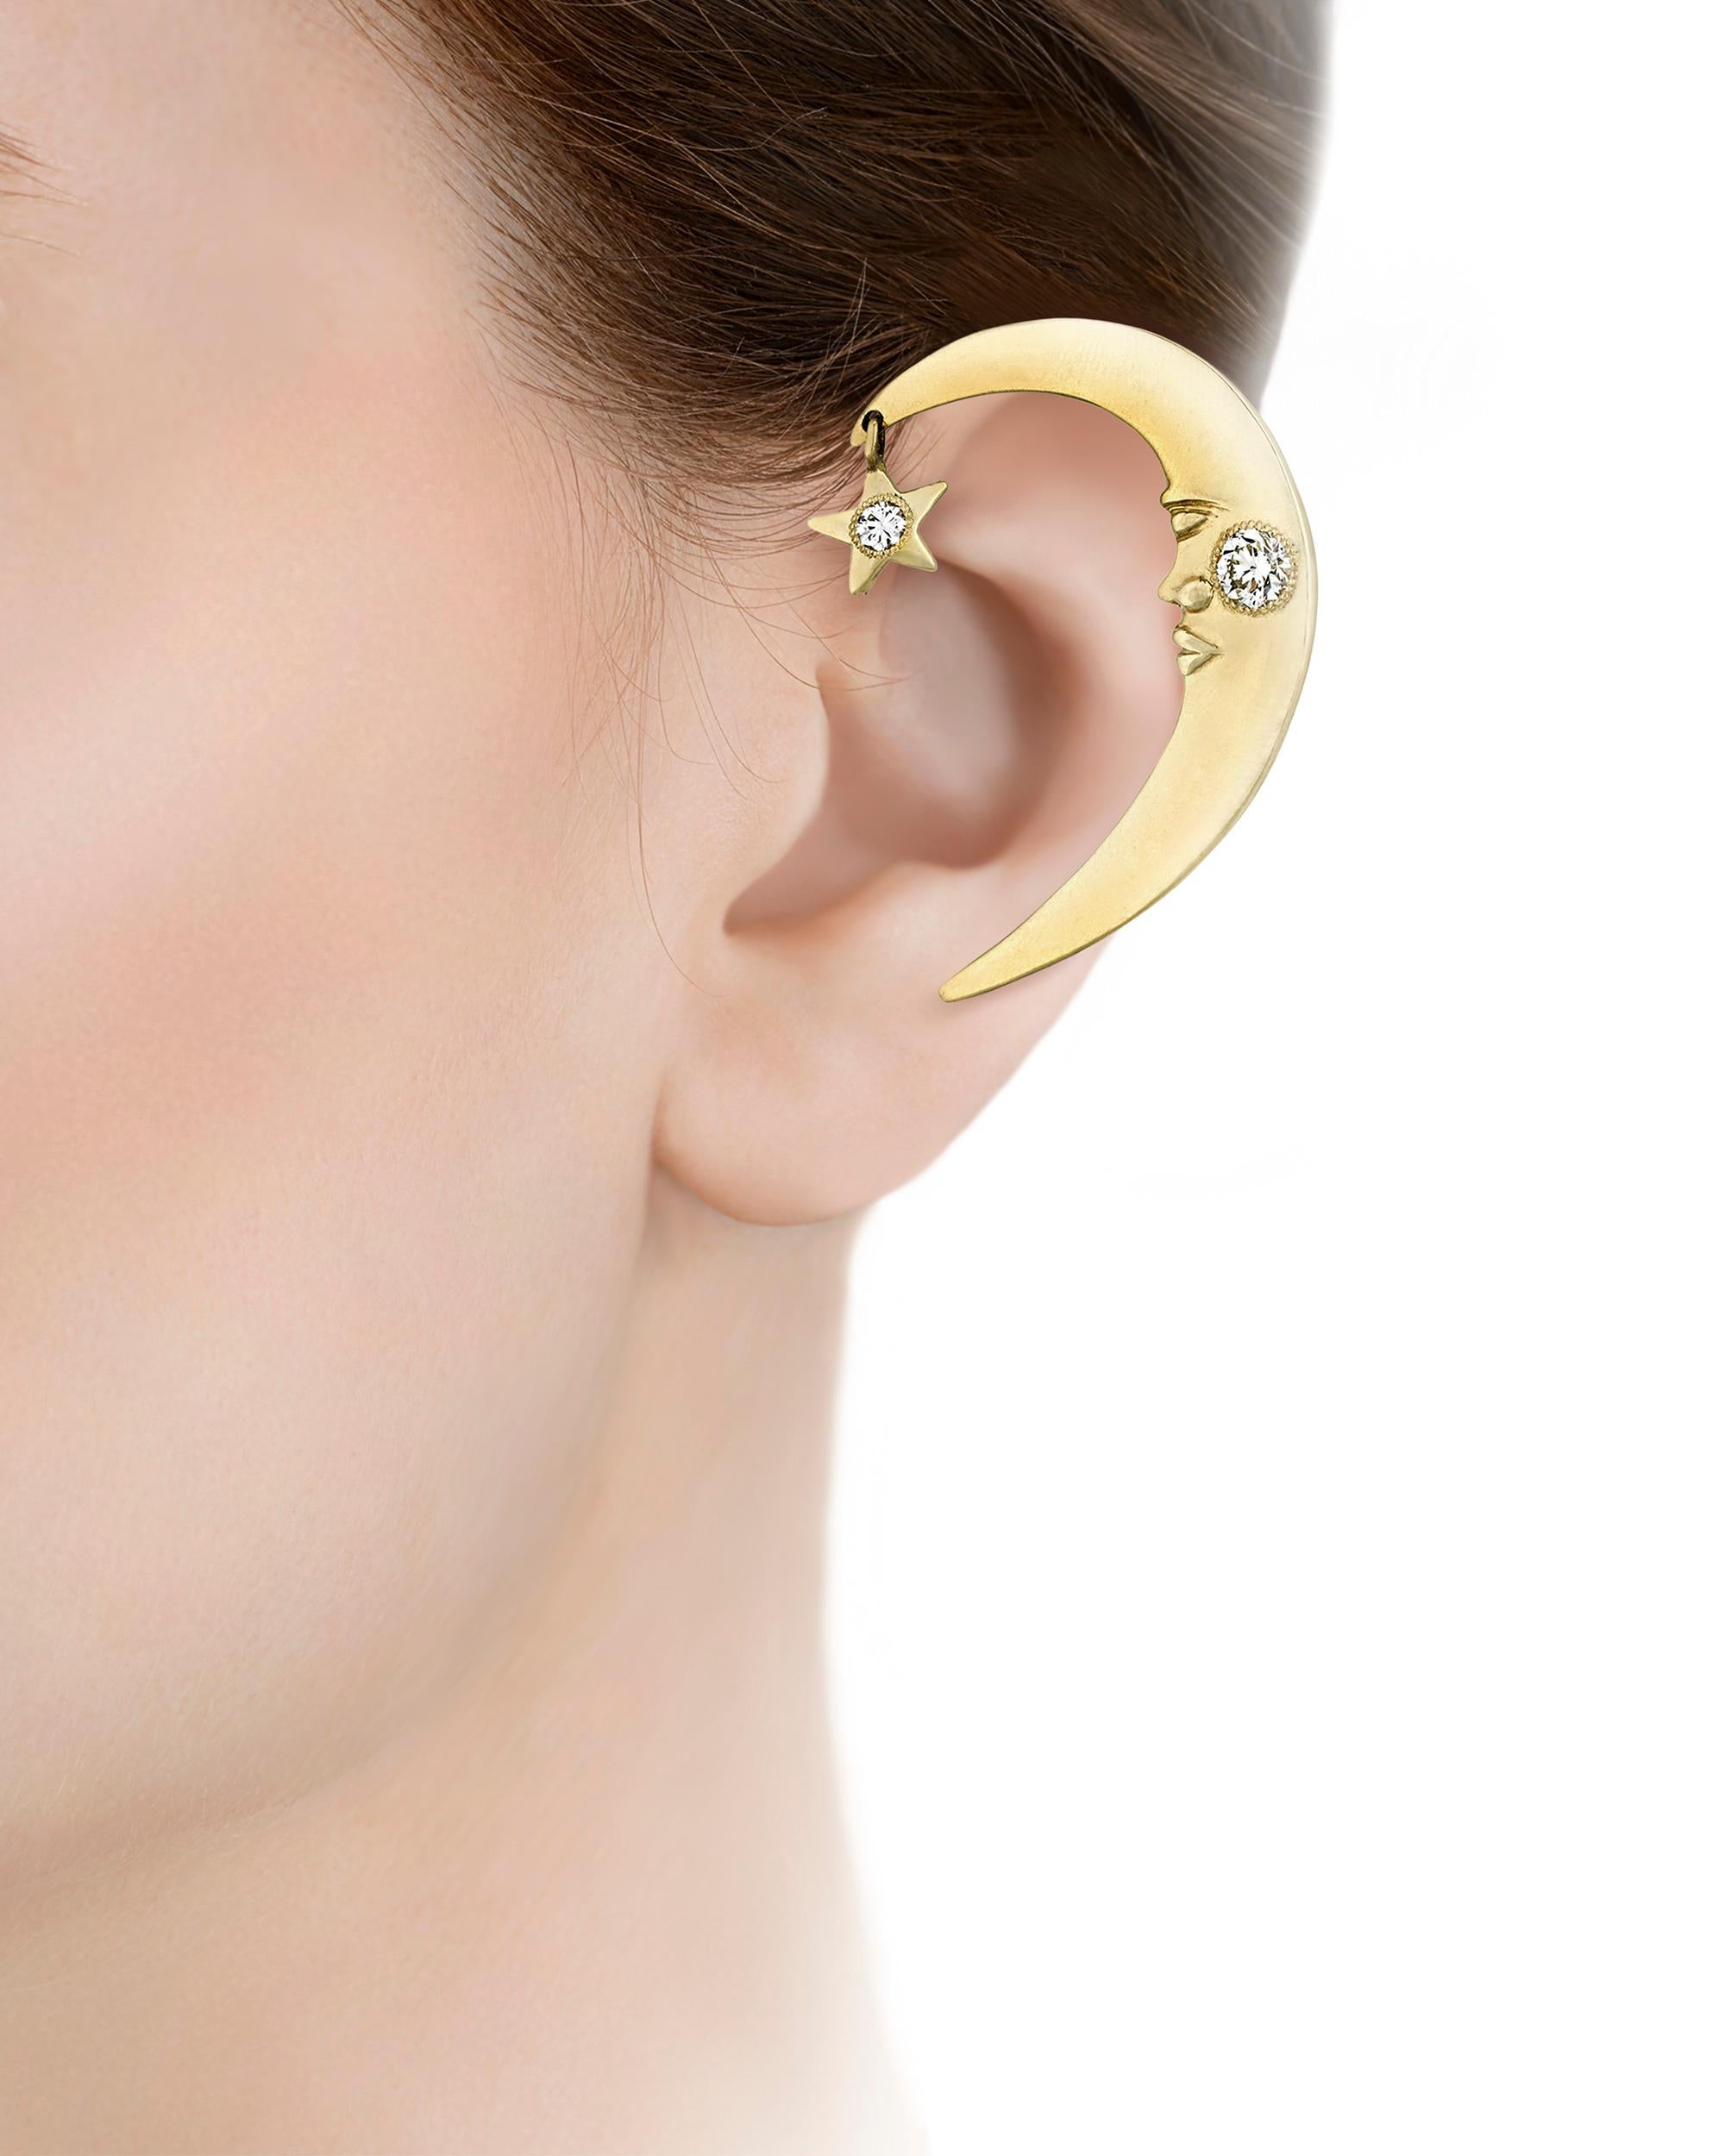 This imaginative ear cuff was once owned by the pop icon Prince and worn on stage during his performances throughout the 1990s. Taking the form of a crescent moon wearing a stoic expression, the 14K yellow gold cuff features 0.50 carat of white